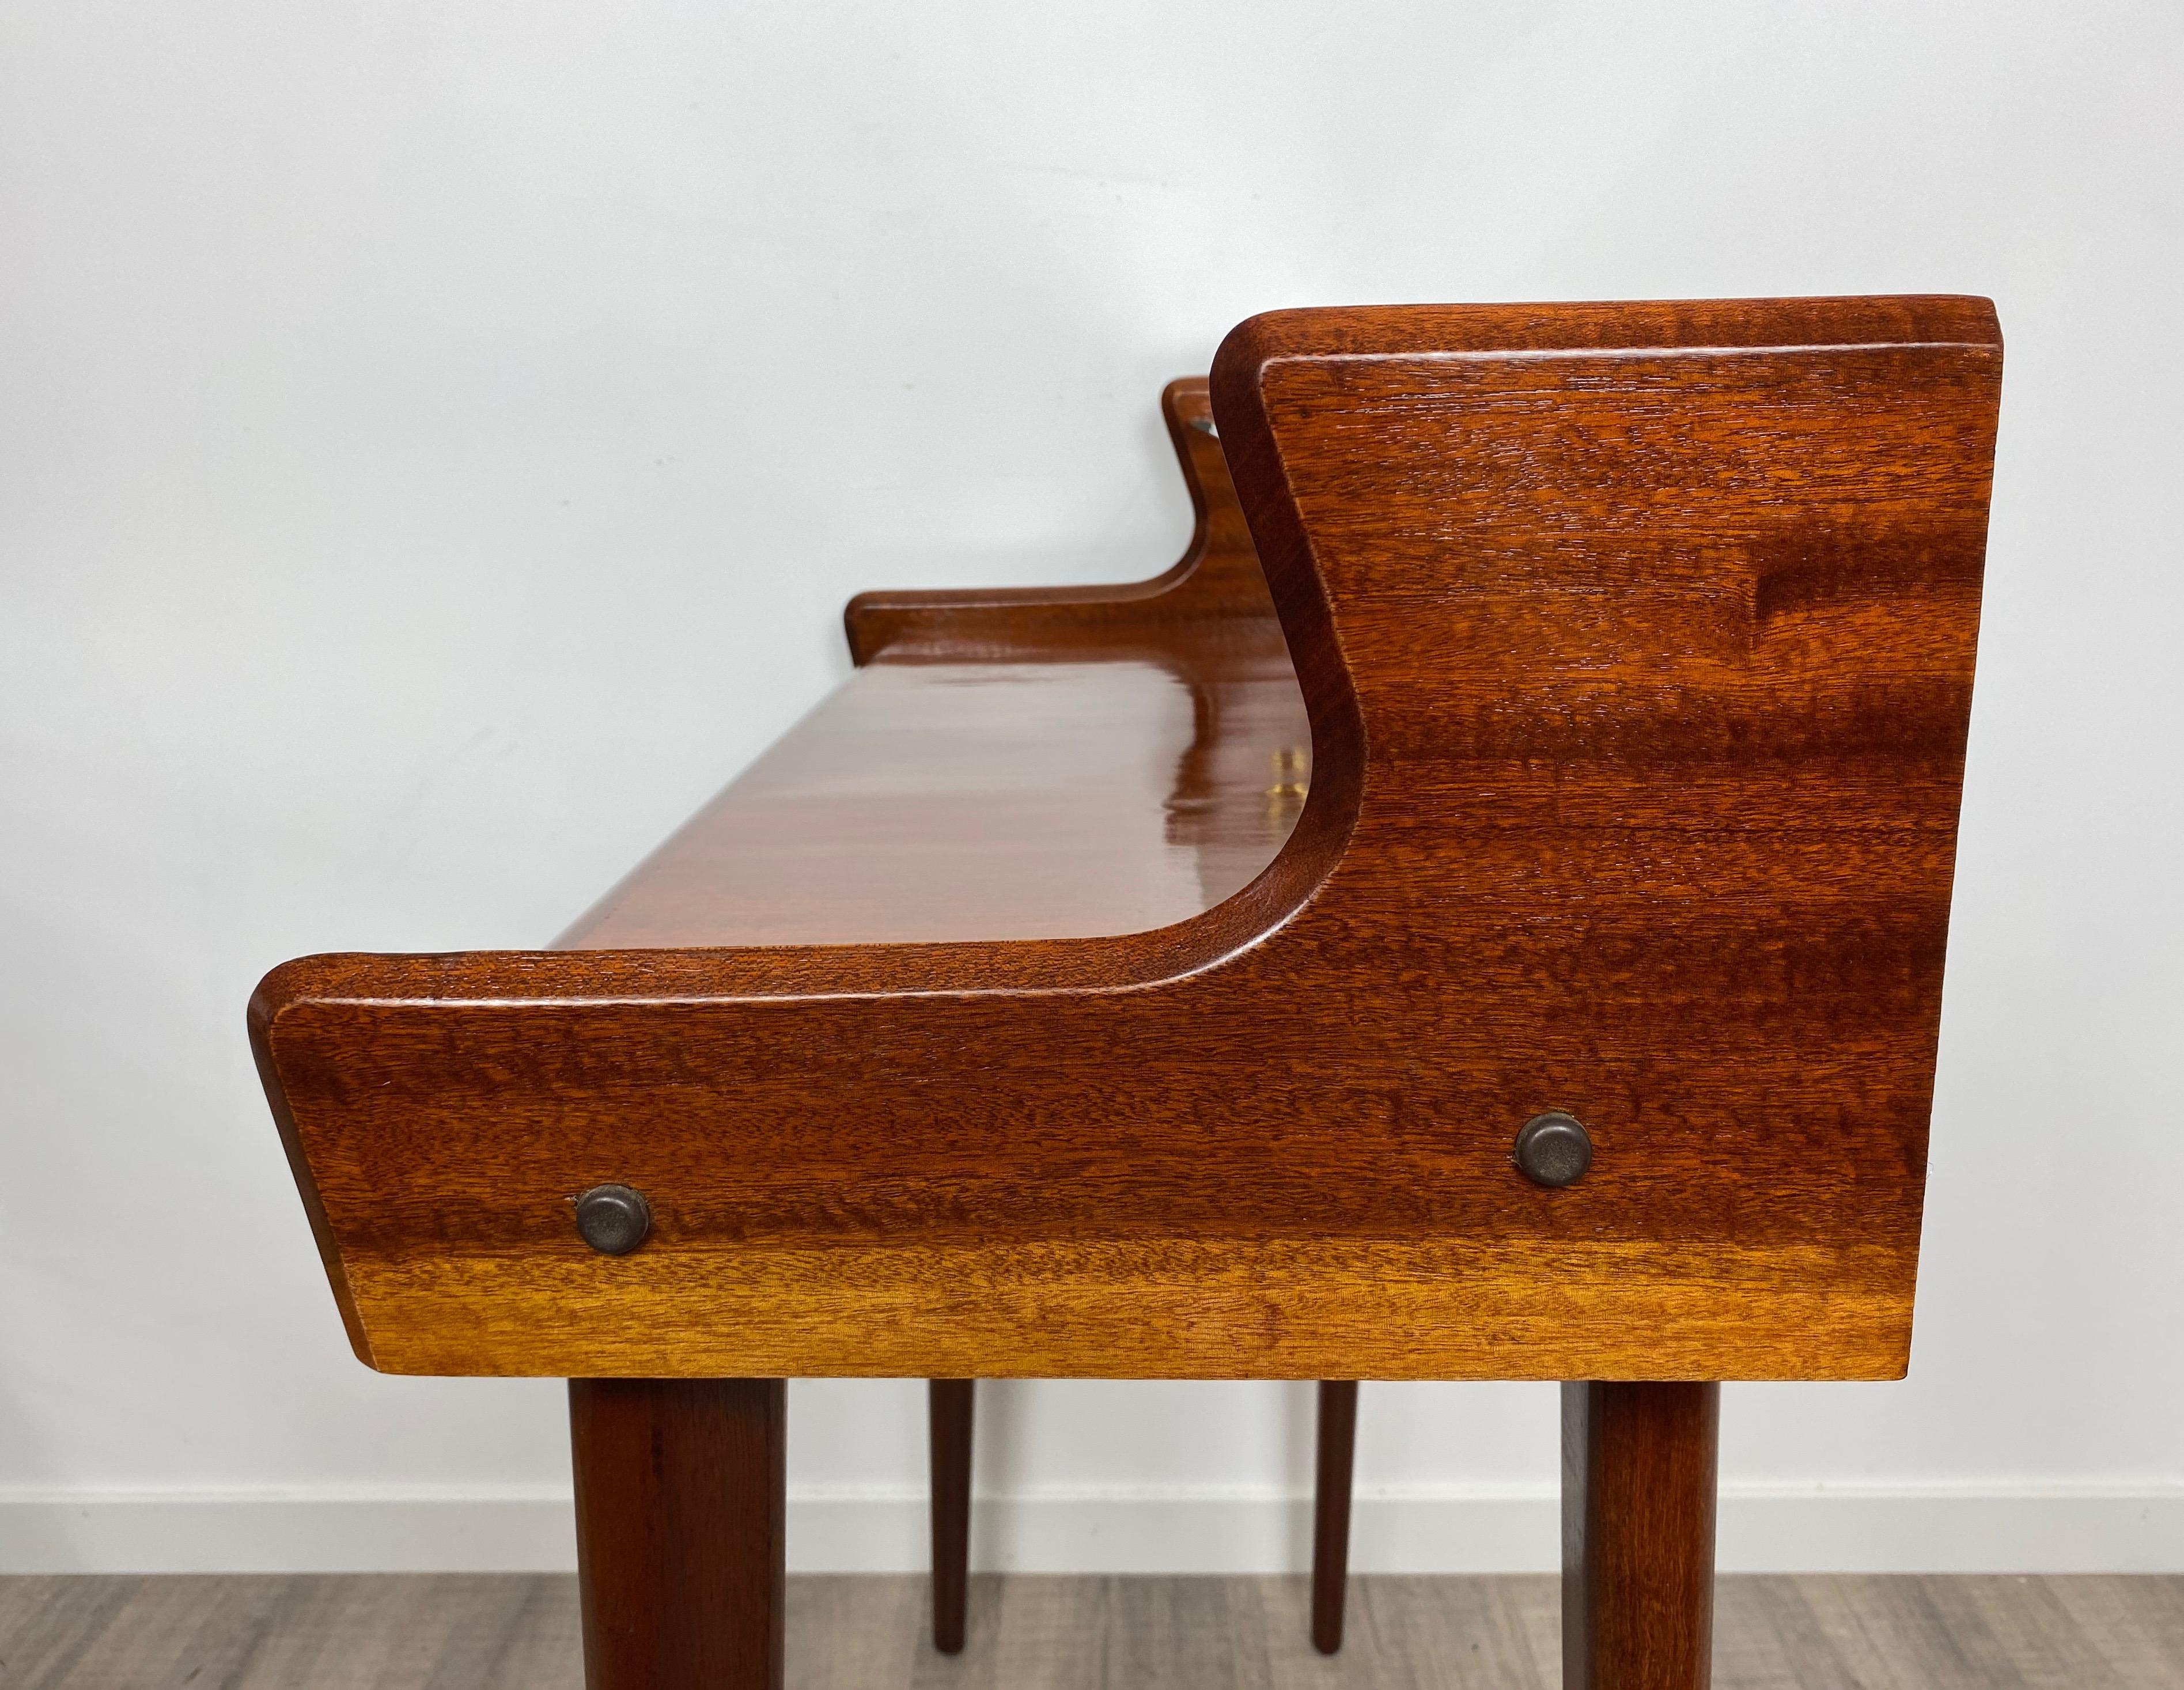 Italian Midcentury Mahogany Wood and Glass Console Table by Carlo de Carli 1950s For Sale 6